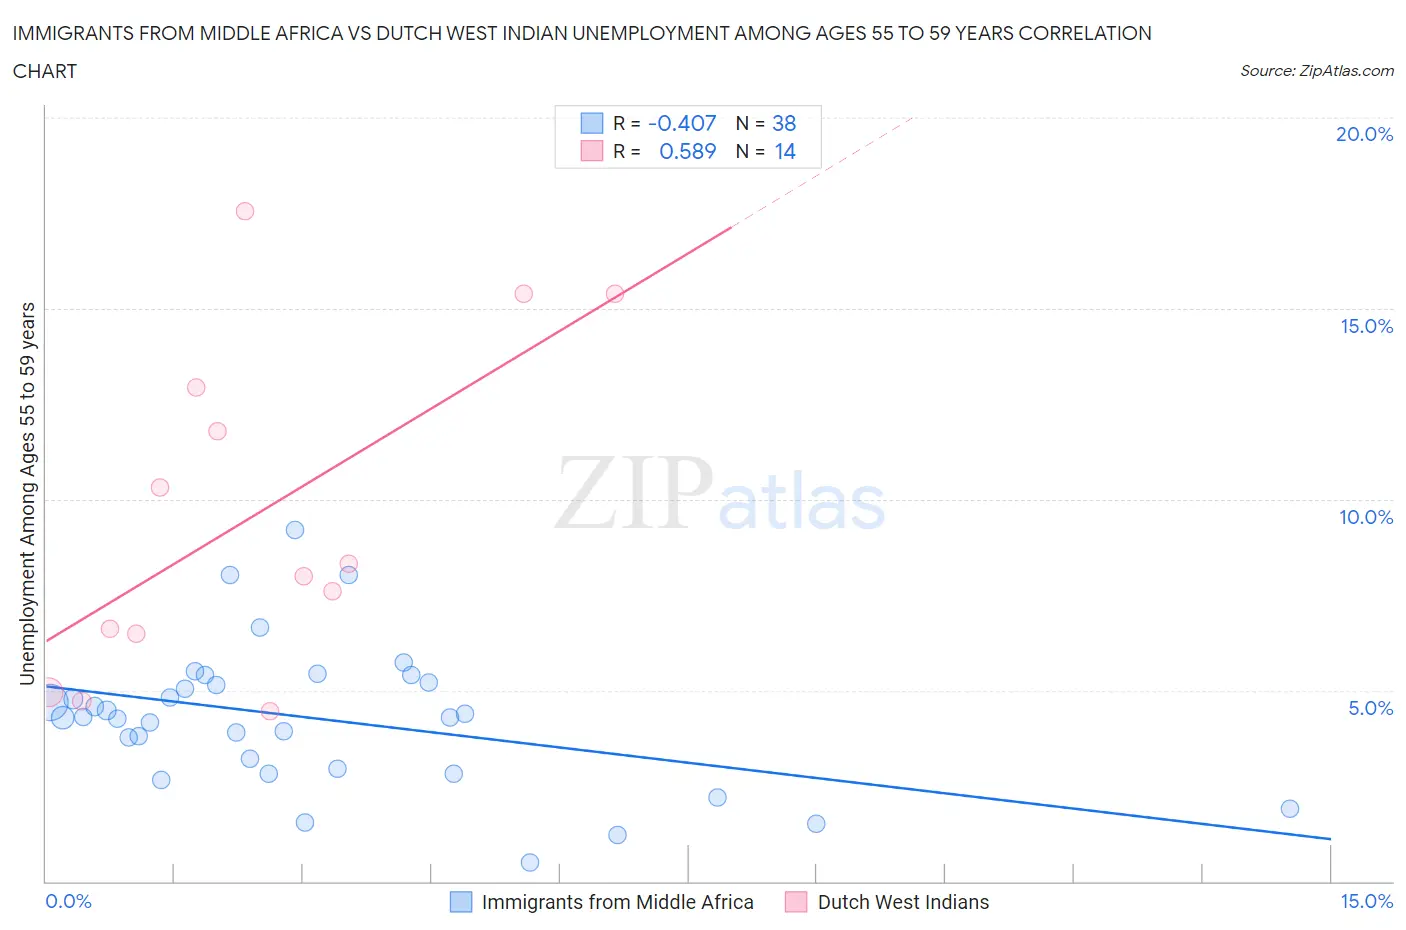 Immigrants from Middle Africa vs Dutch West Indian Unemployment Among Ages 55 to 59 years